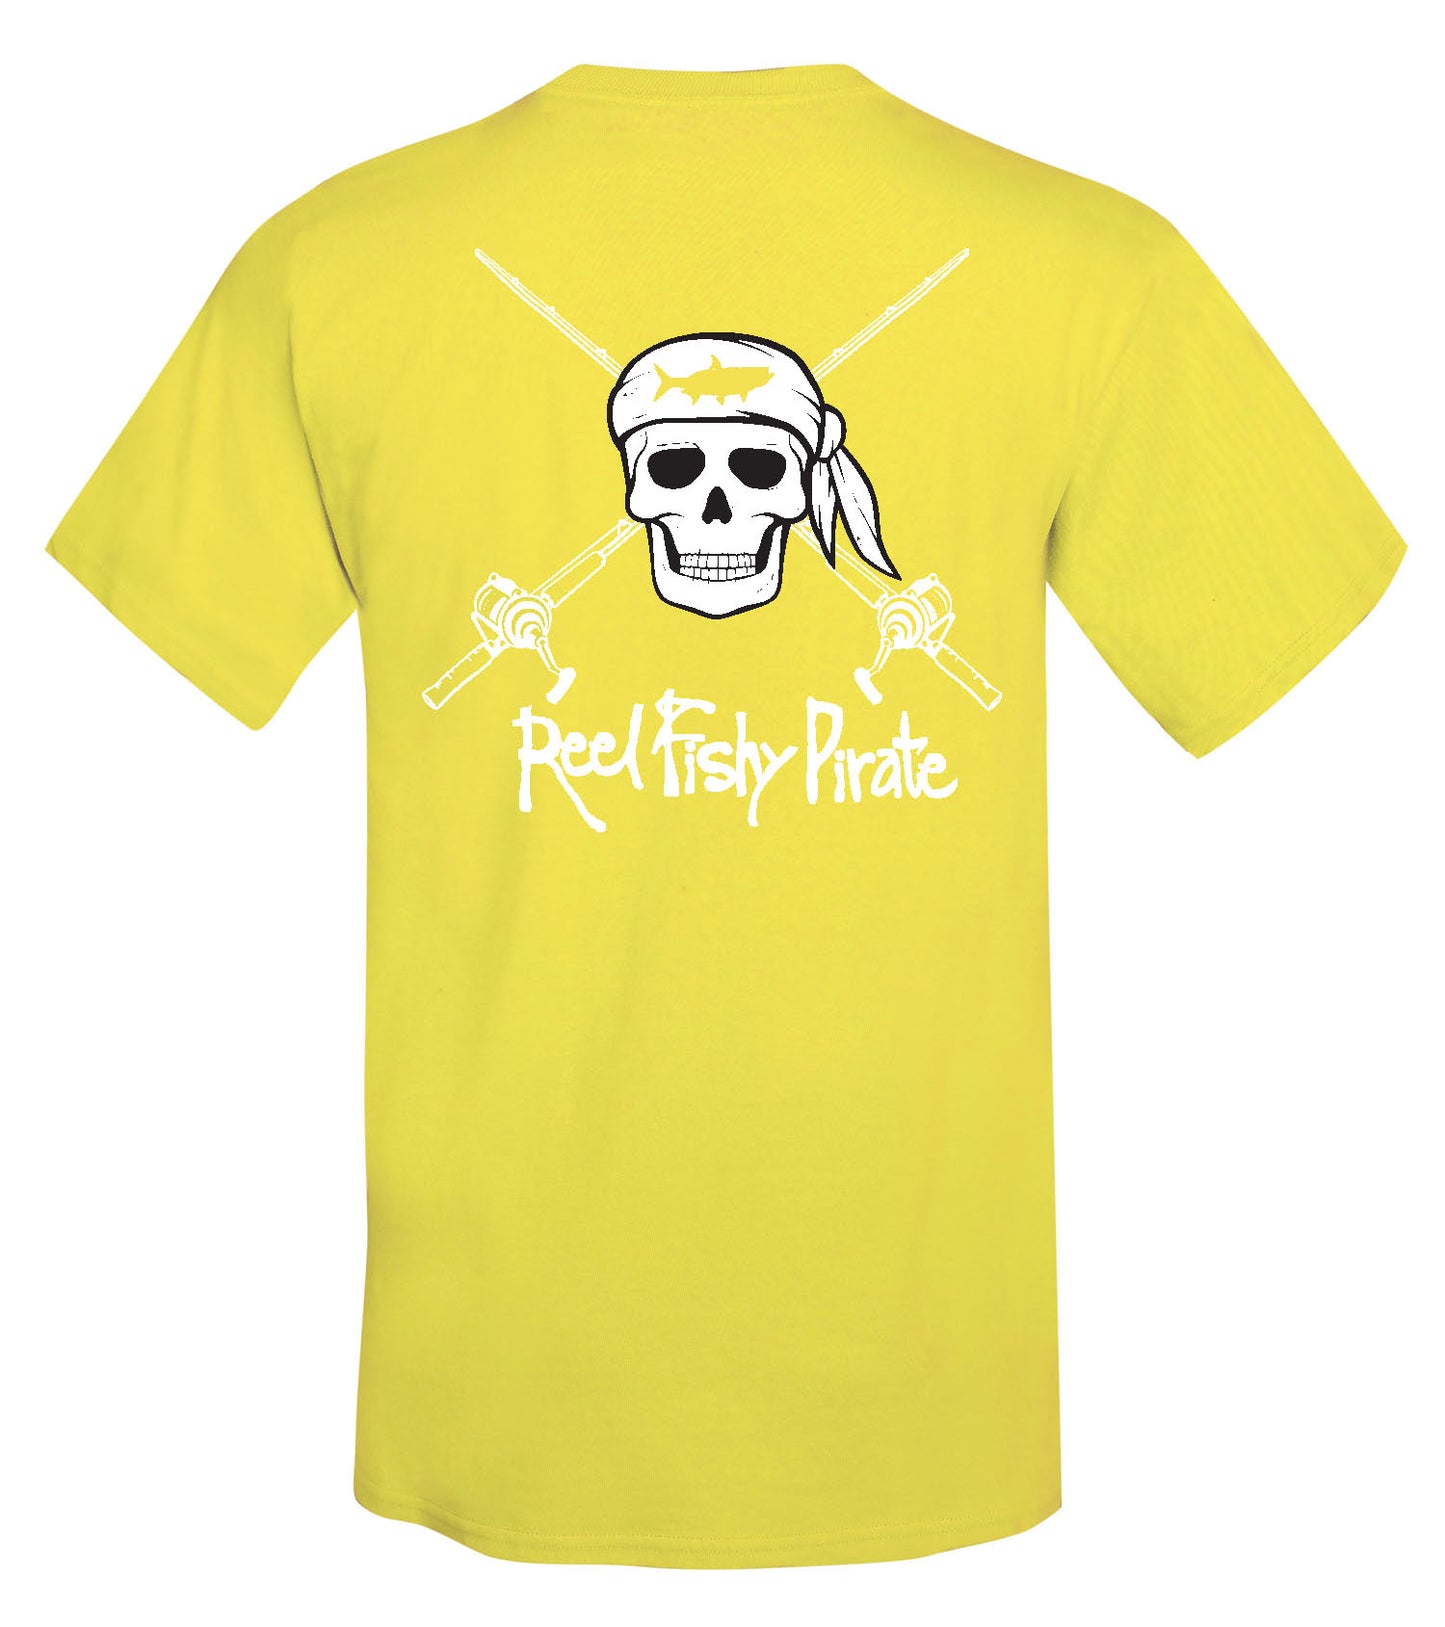 Youth Reel Fishy Pirate Skull & Rods t-shirt - Yellow